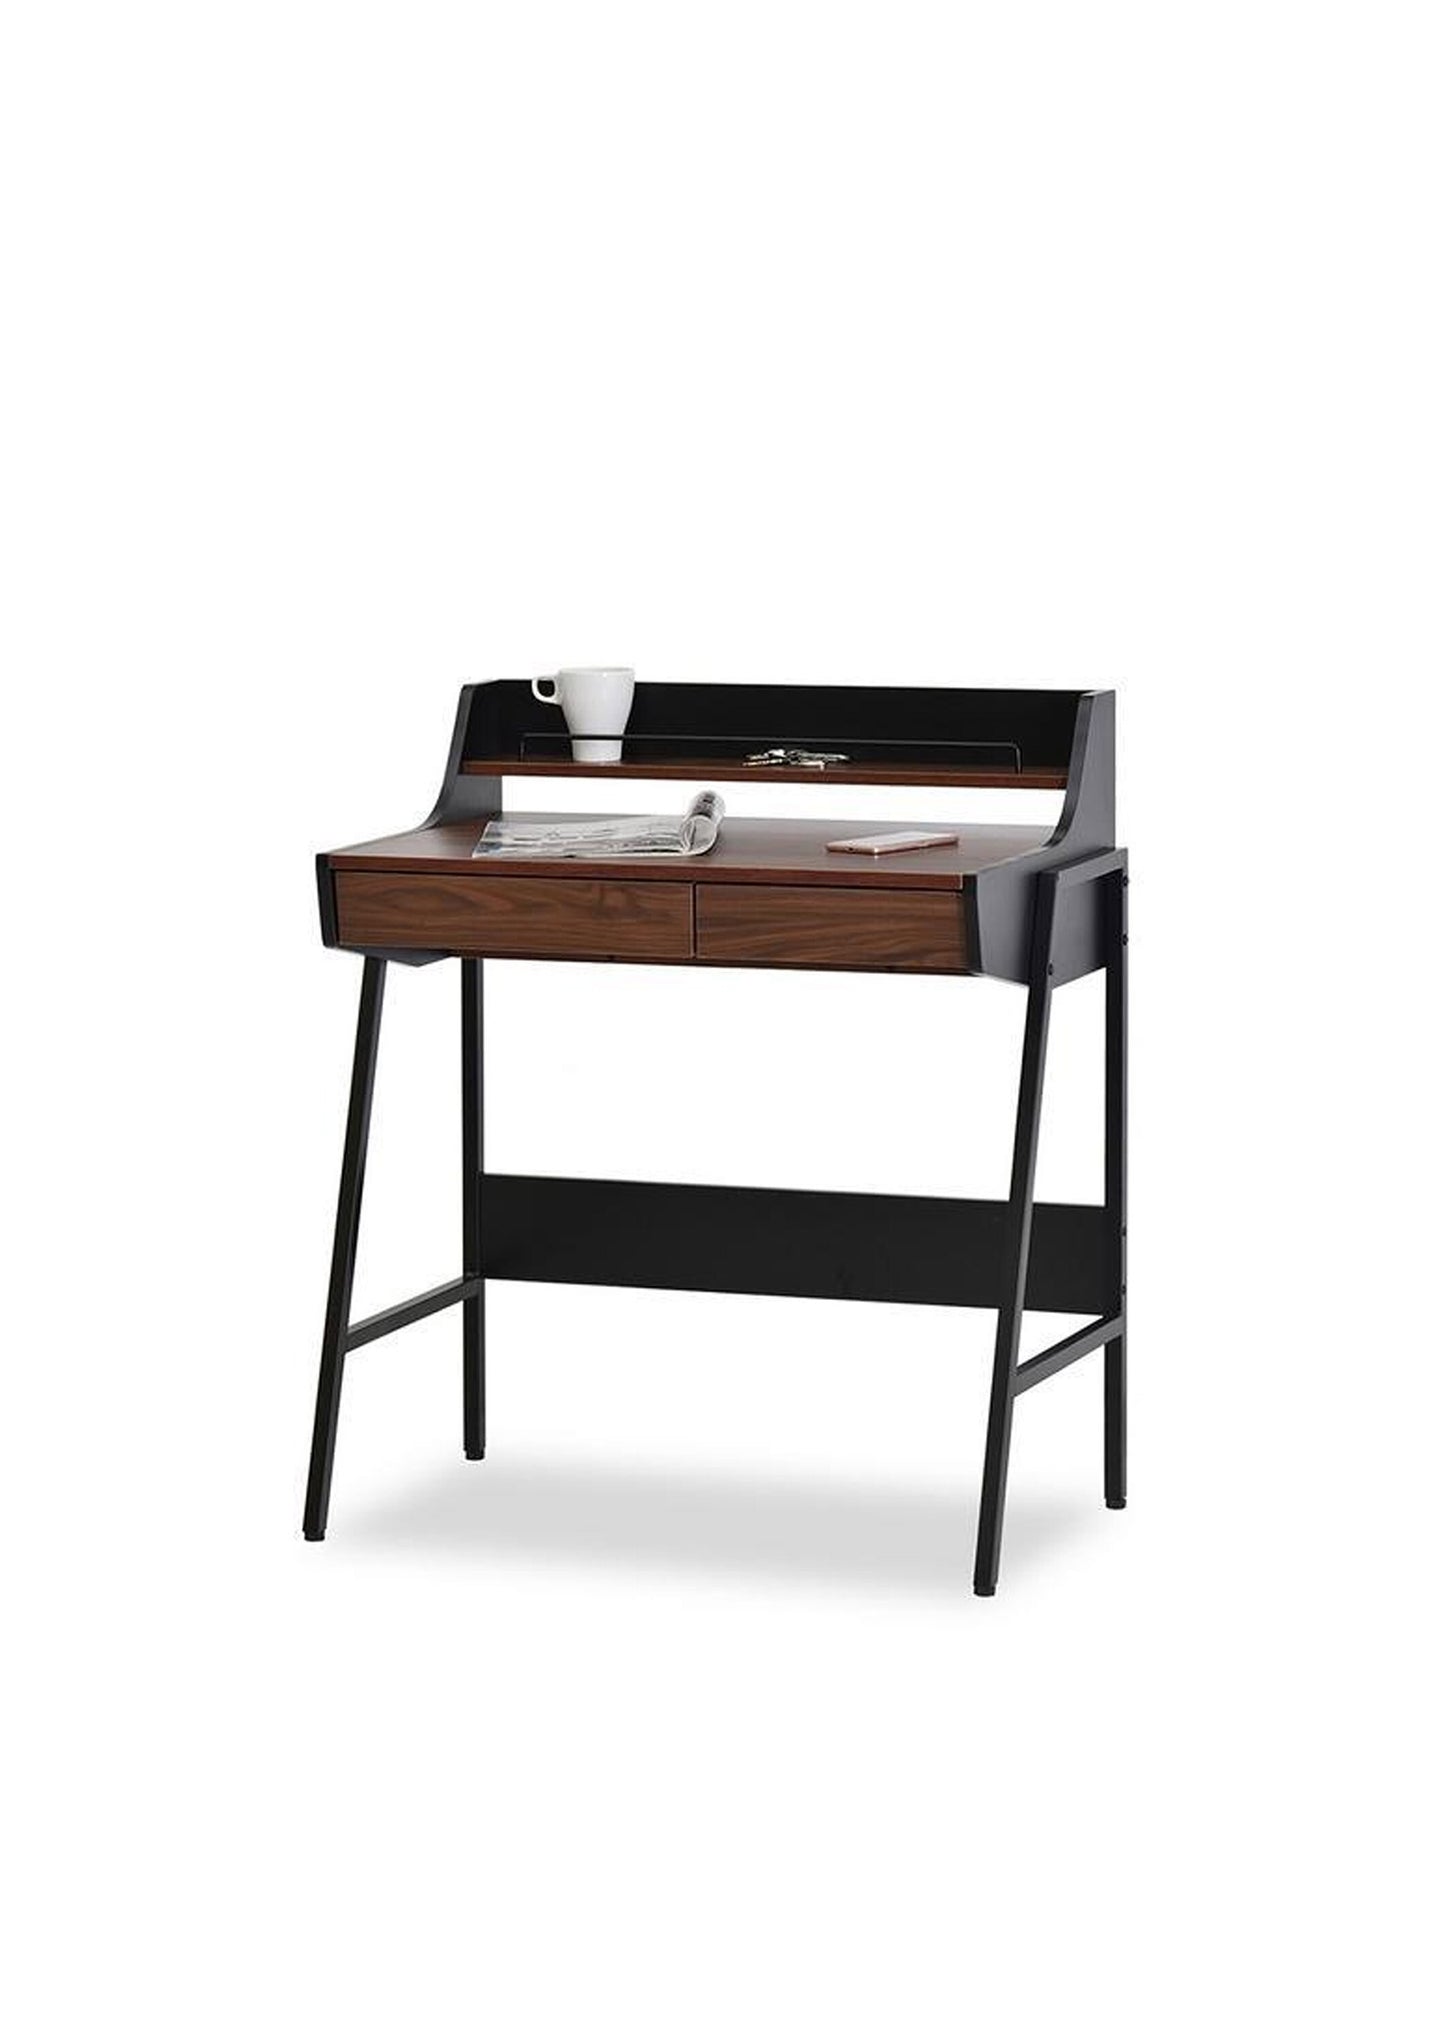 Retro Vintage style Office Desk in black and walnut